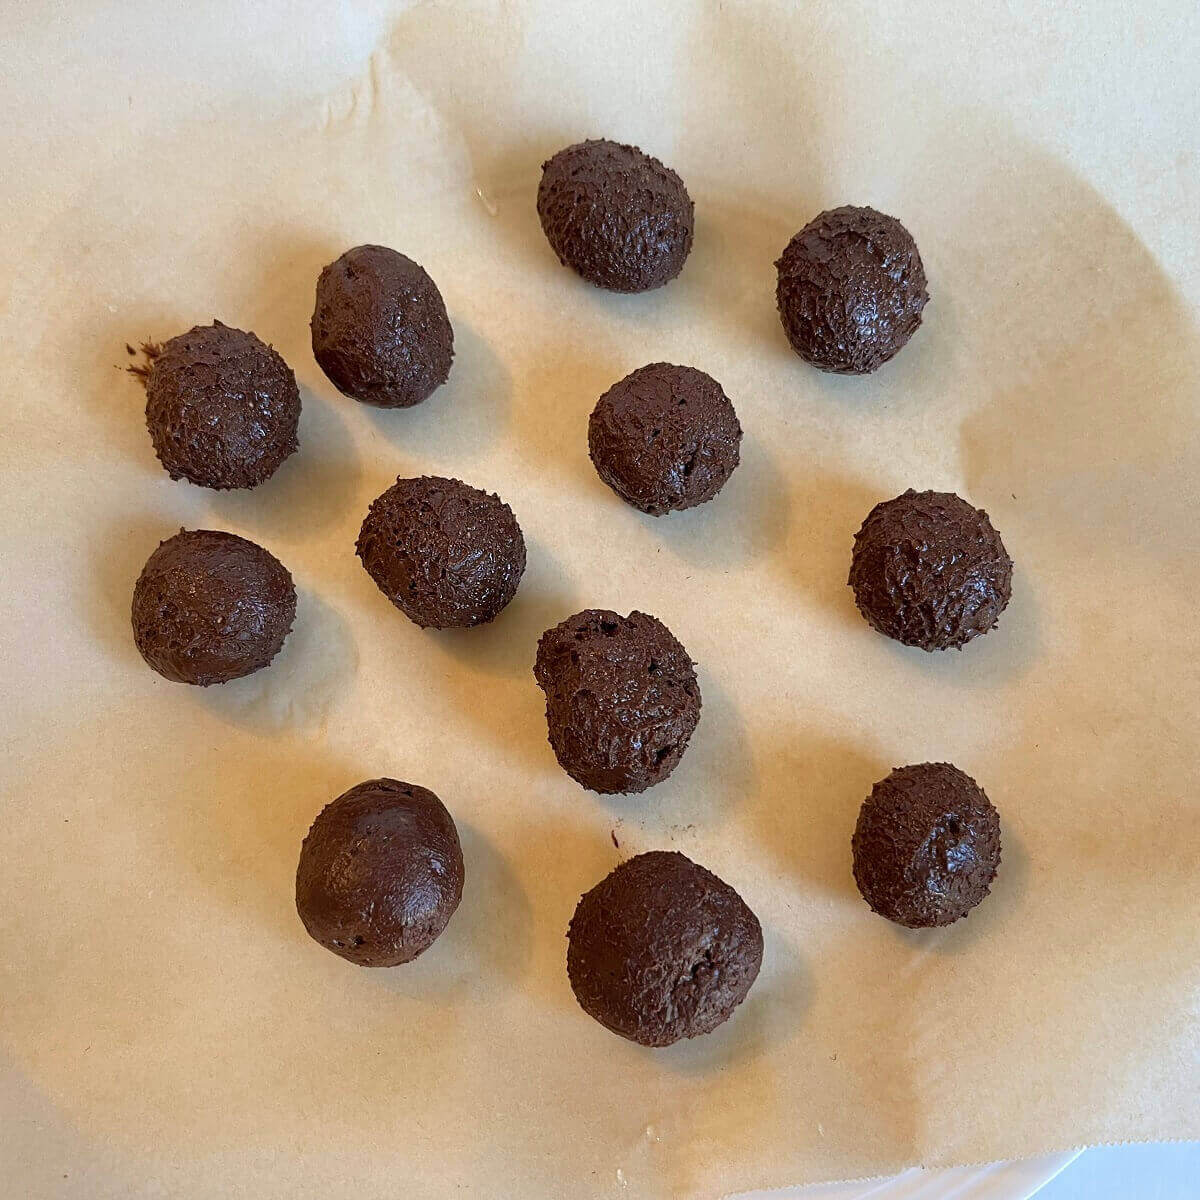 Chocolate almond butter balls on parchment paper.